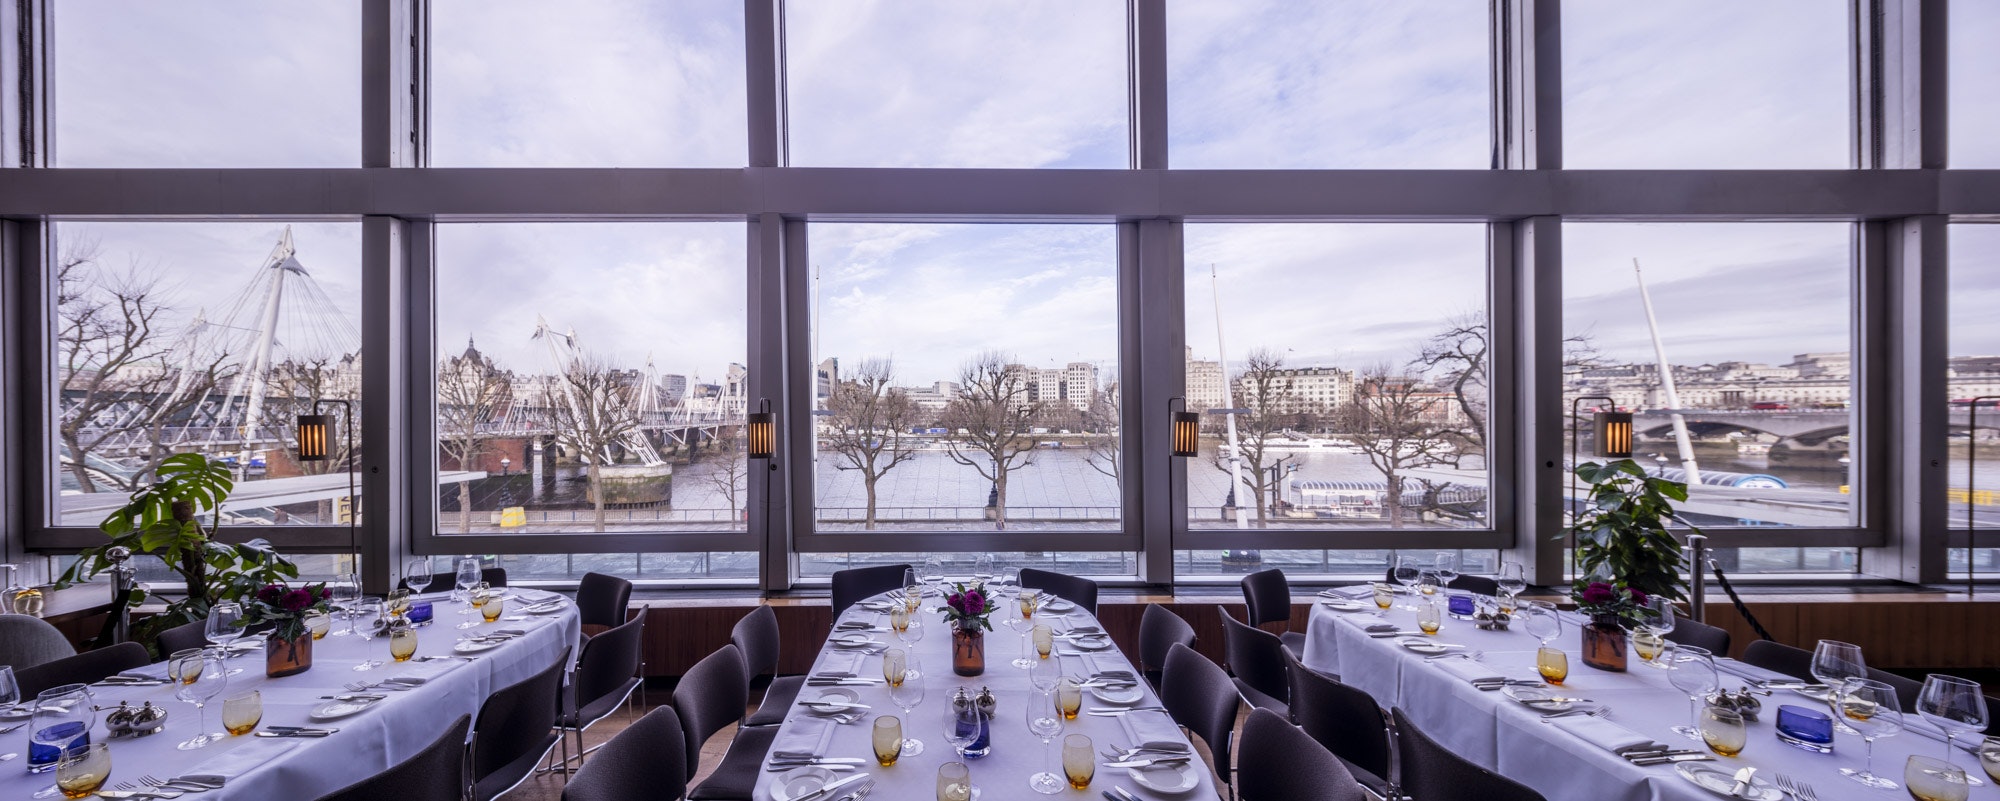 Private Dining Rooms Venues in West London - Skylon